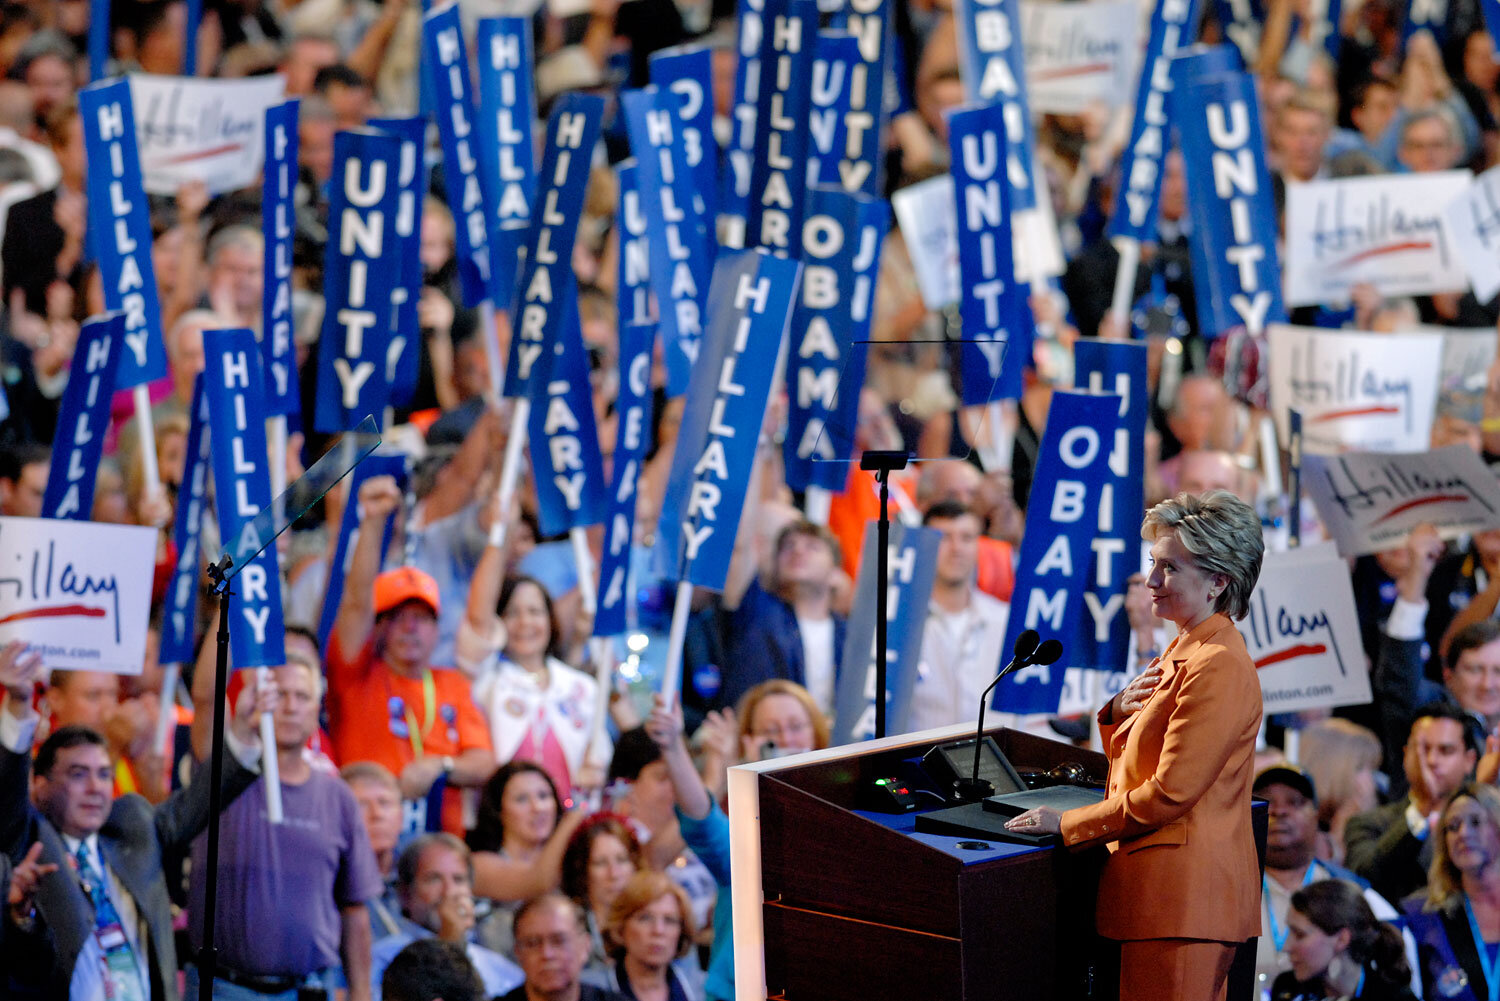 2008 Democratic National Convention